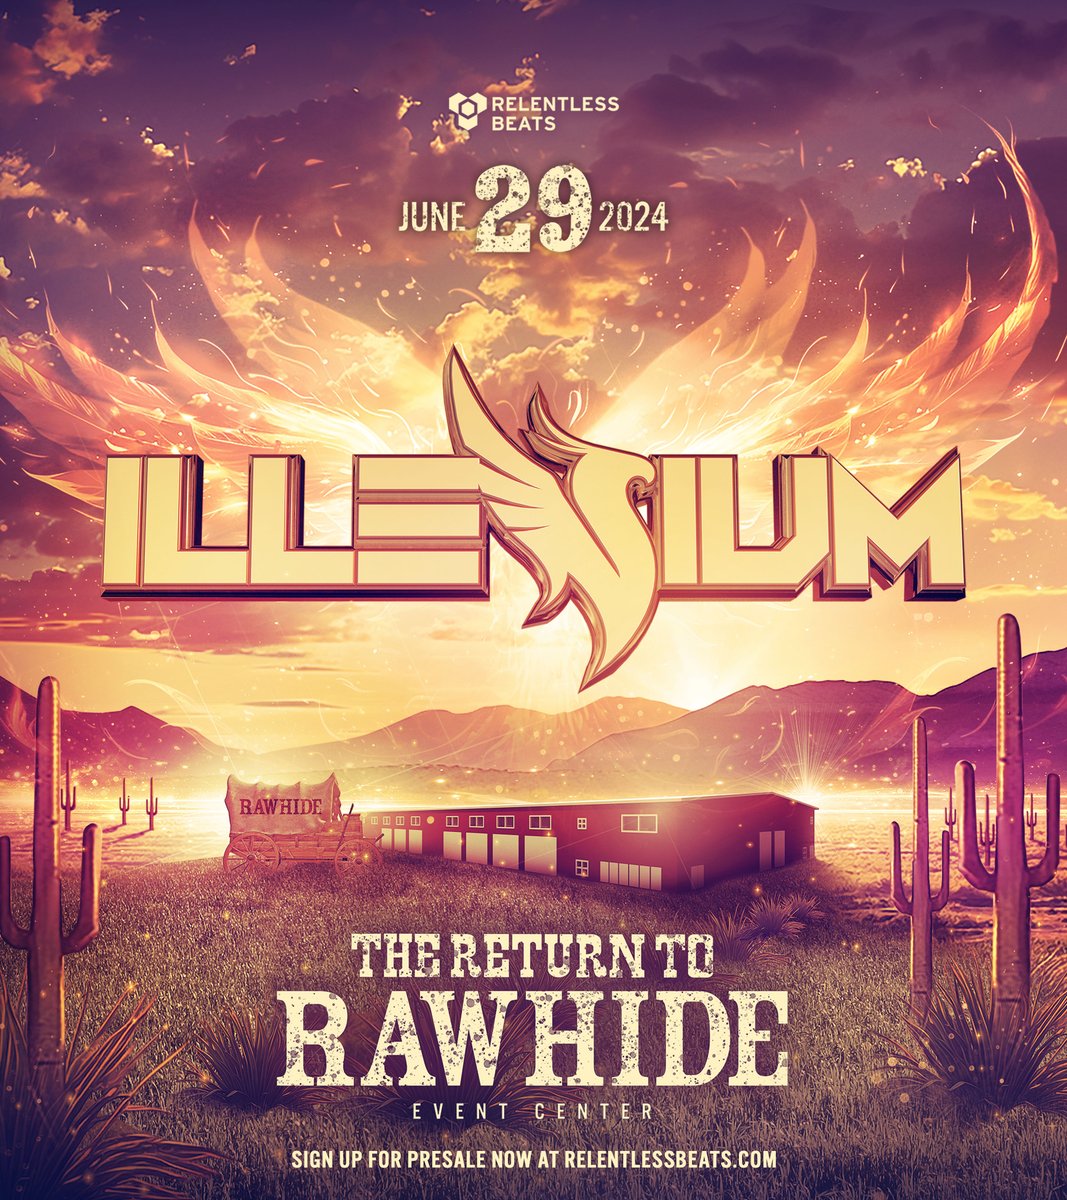 #JustAnnounced: @Illenium returns to Arizona for his largest headline in the state to date at our long-awaited return to Rawhide Event Center on 6/29!

Signup for presale now: rb.ht/Rawhide24

Presale Thursday, May 23 at 10am PT
Tickets on sale Friday, May 24 at 10am PT